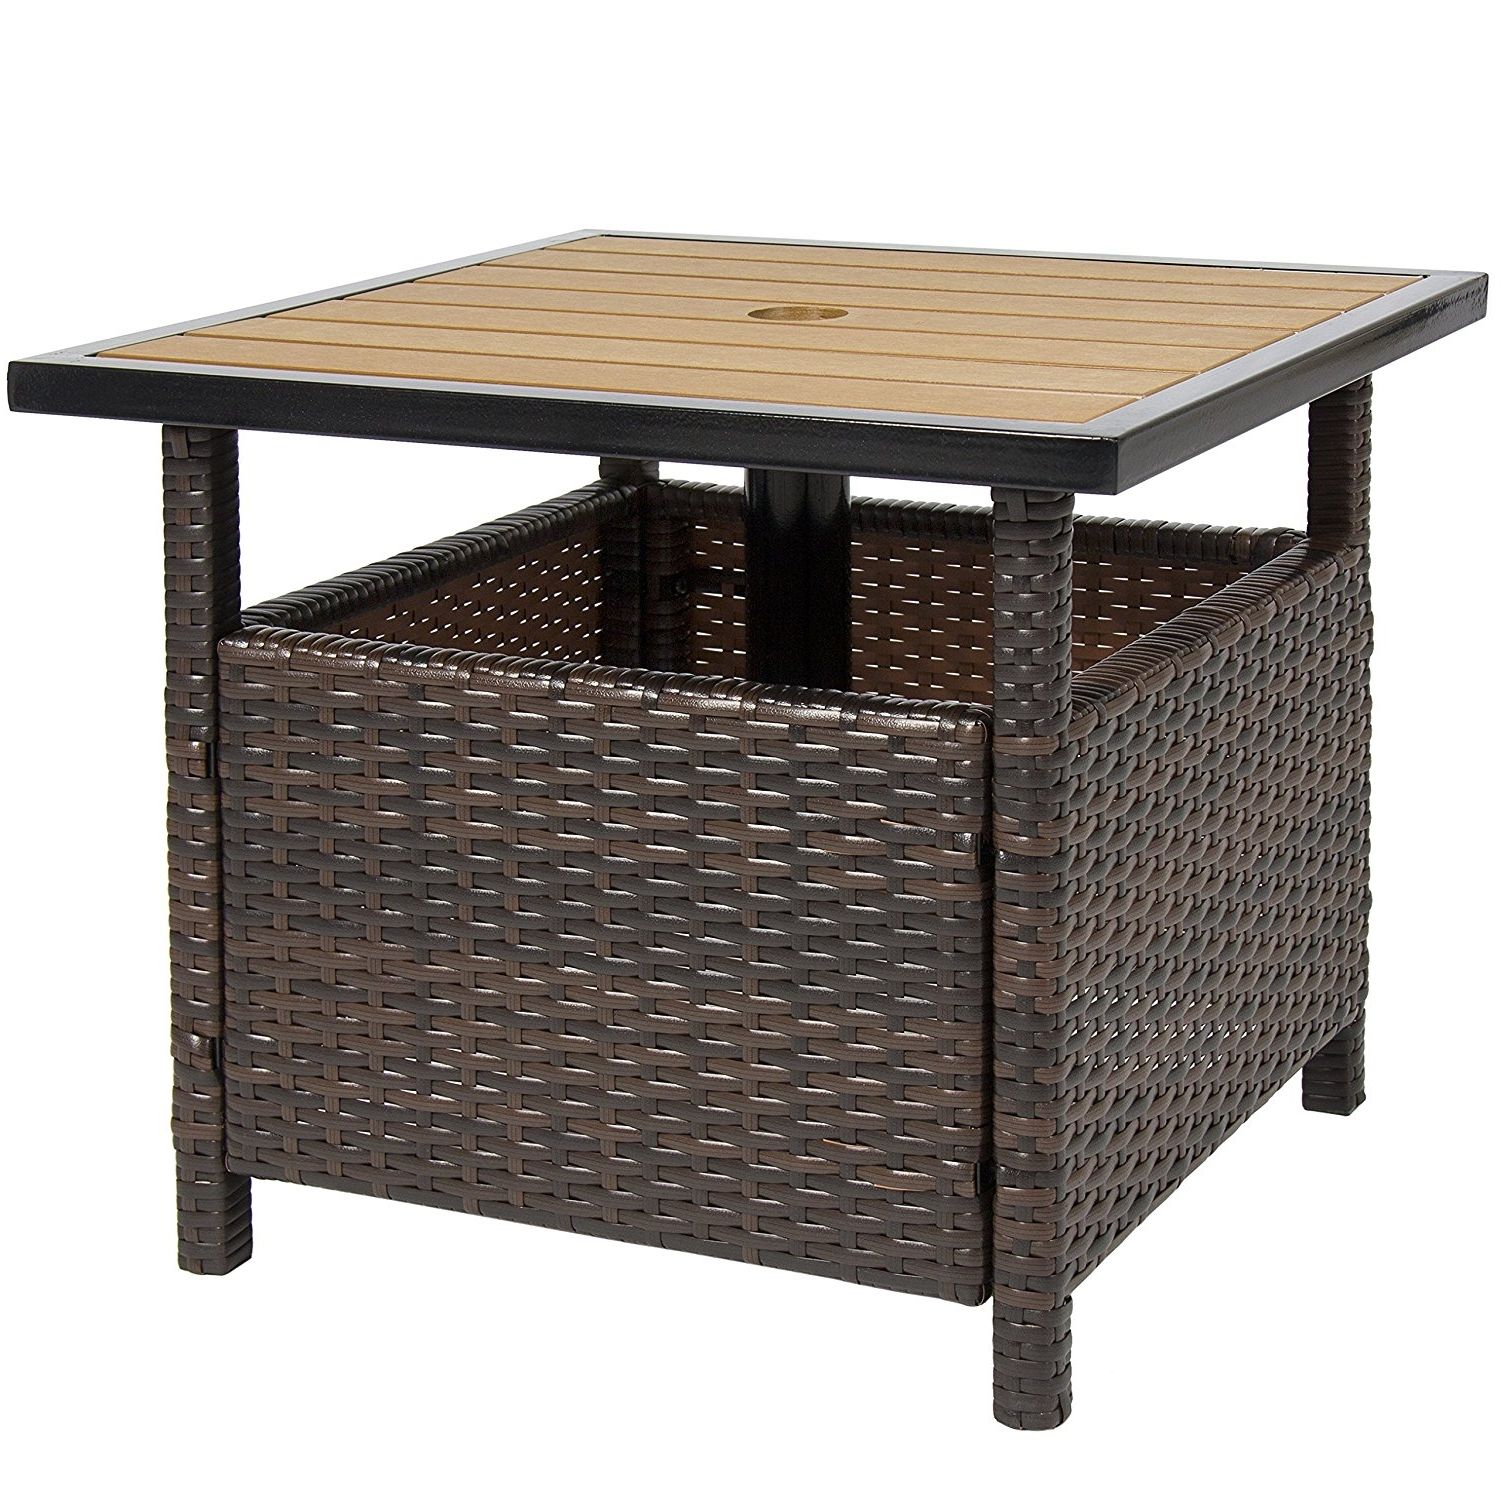 Fashionable Patio Umbrella Side Tables Throughout Captivating Outdoor Umbrella Stand 12 Maxresdefault (View 4 of 20)